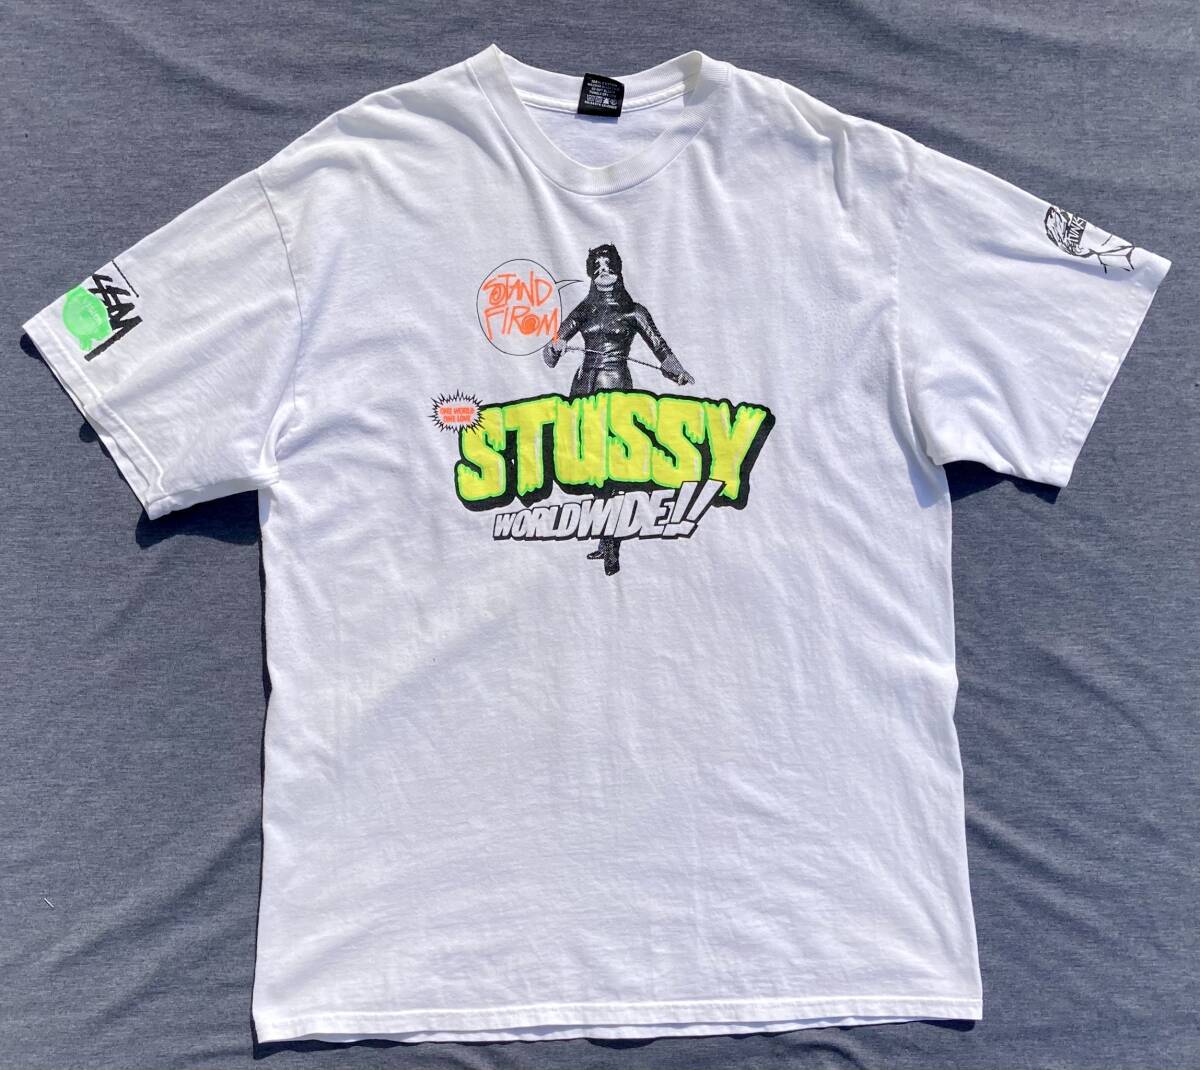 00s stussy WORLD WIDE Tシャツ L 白 両面プリント ステューシー X-RAY VISION FUNKY FRESH の画像1